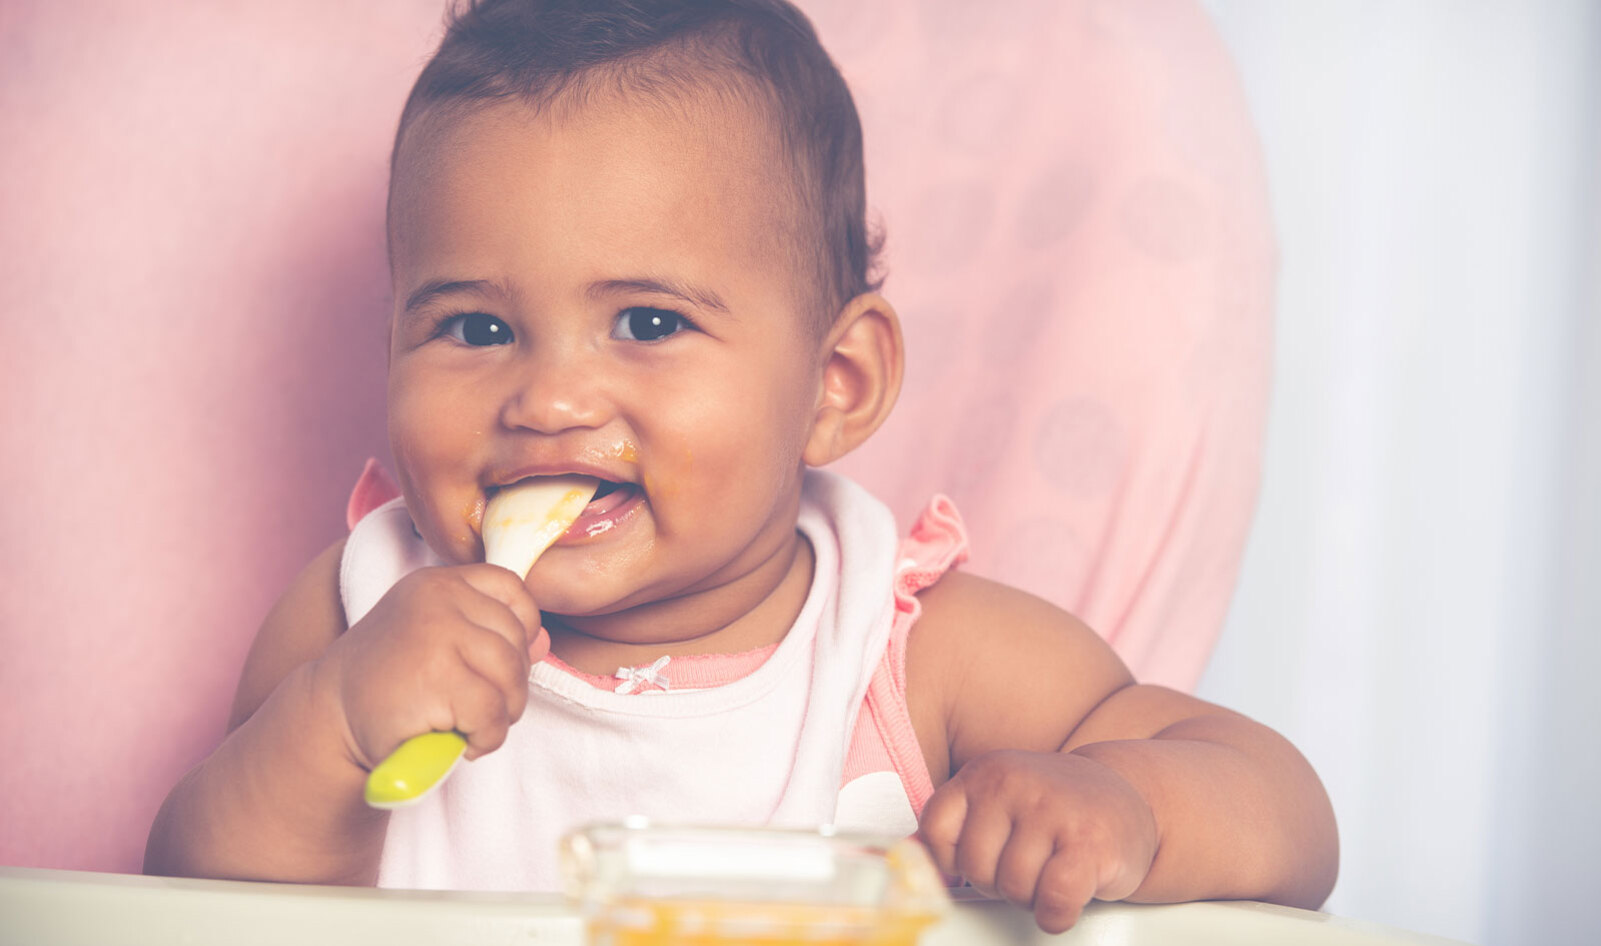 55 Percent of New Parents Want More Plant-Based Protein for Children